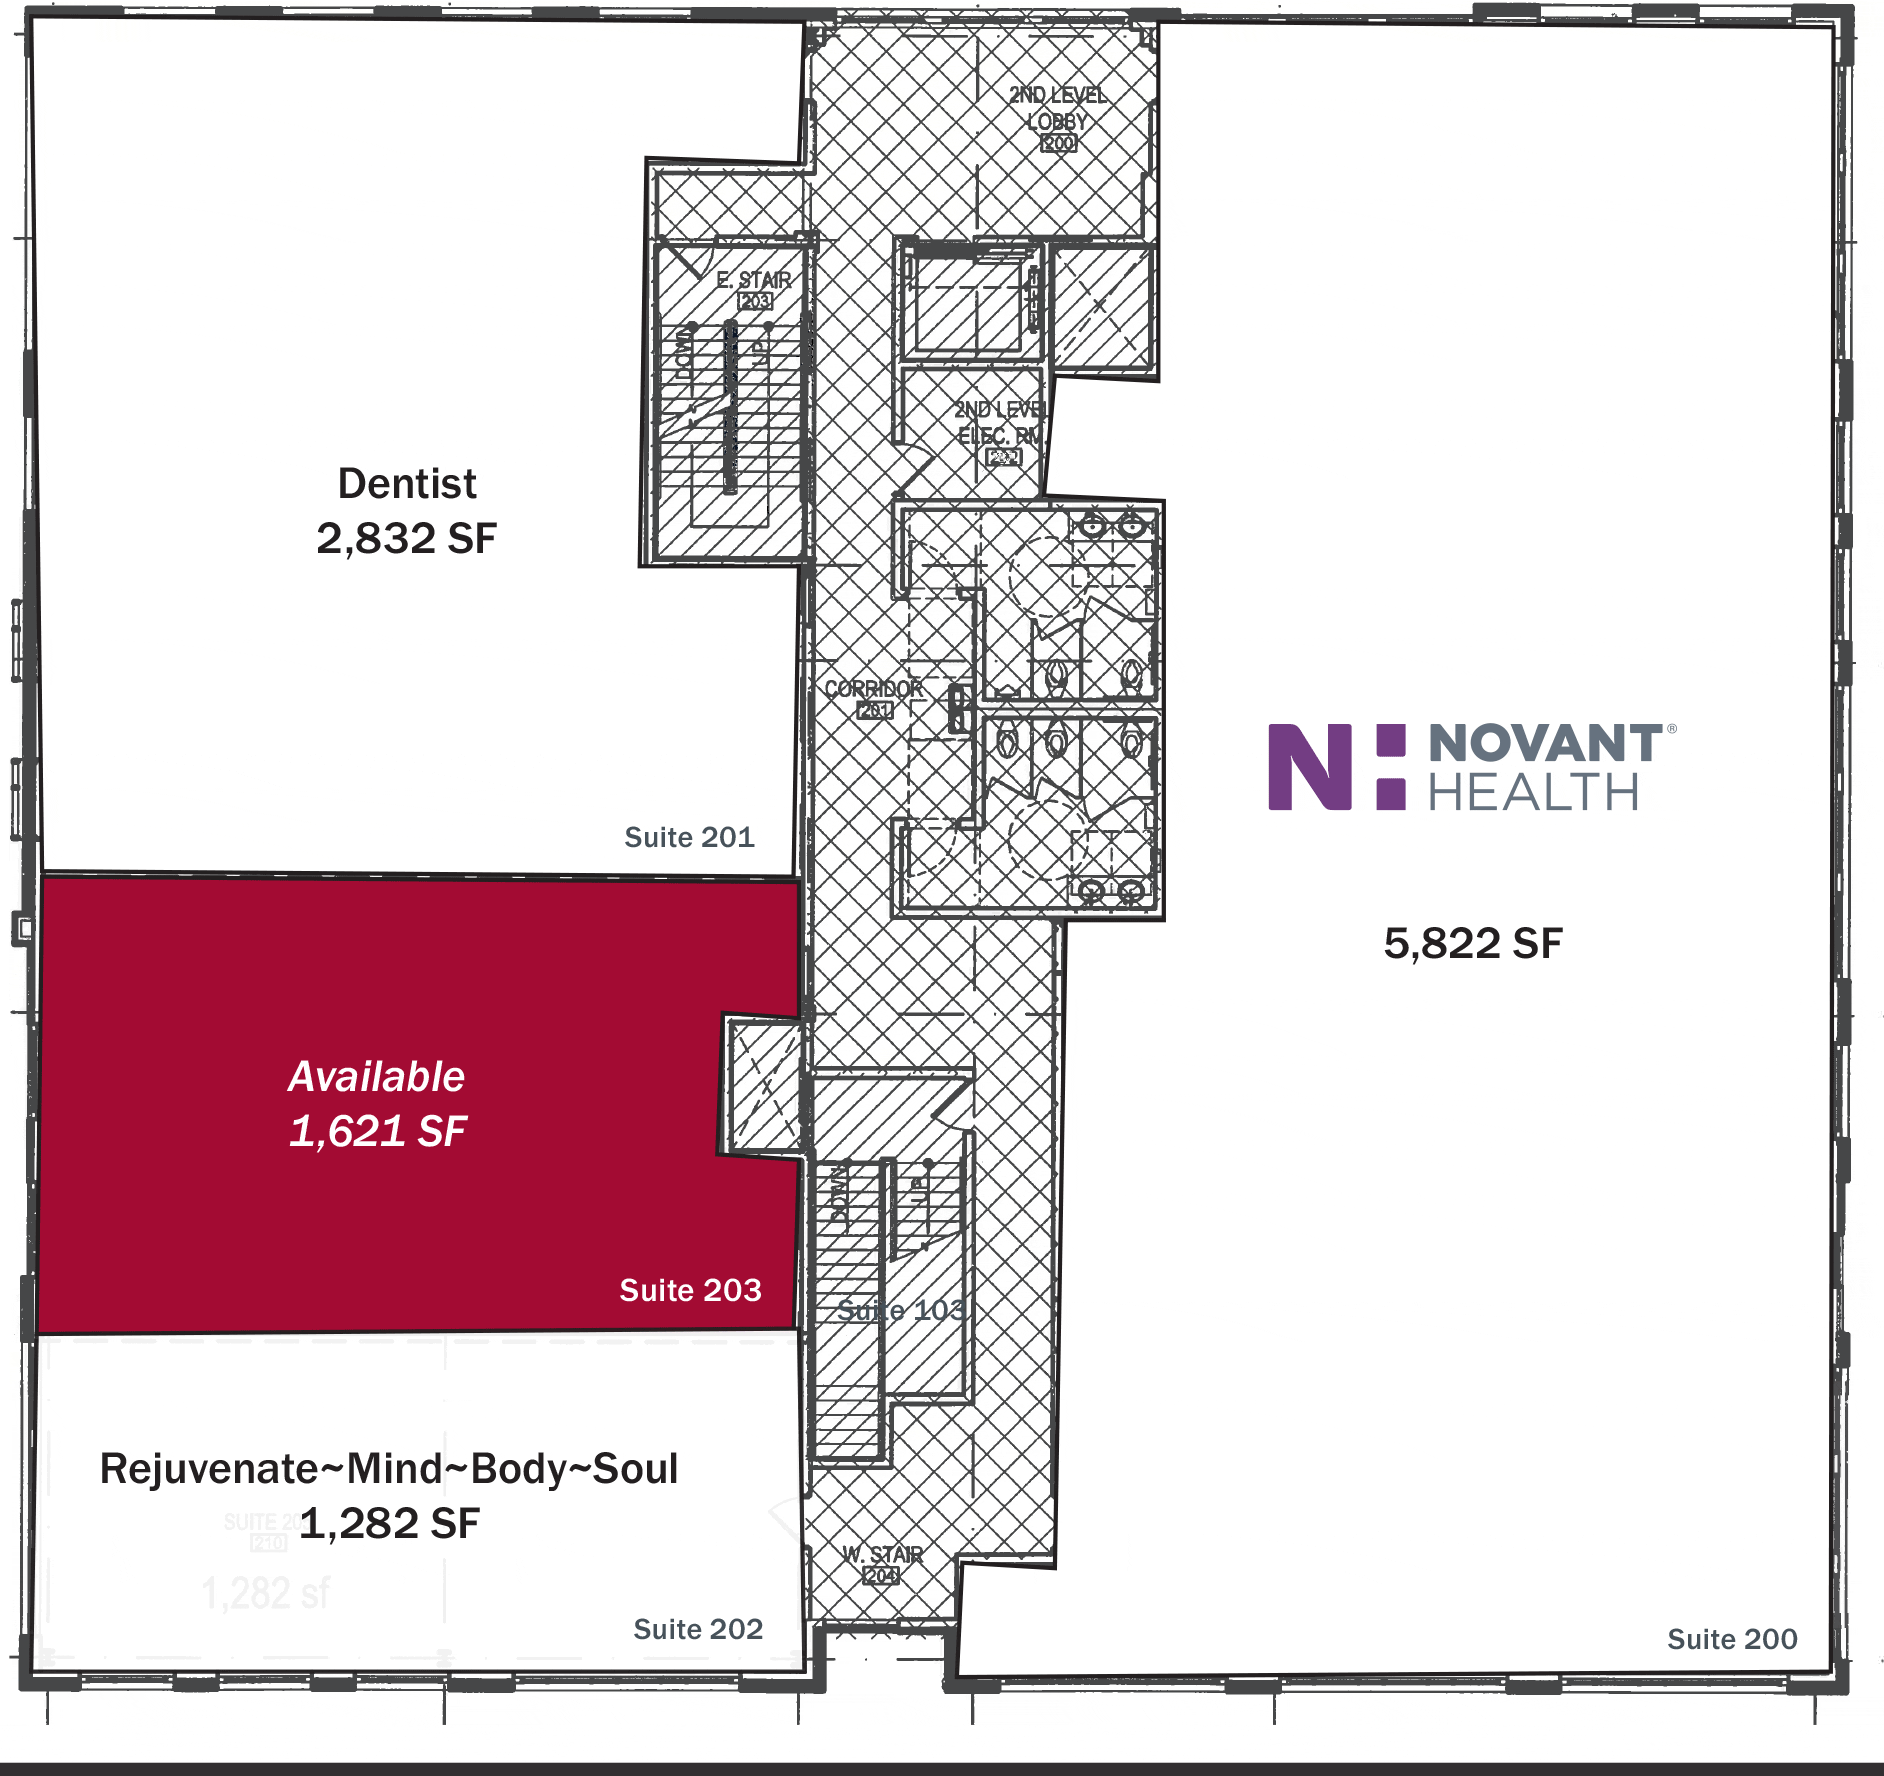 Siteplan of 2400 South Blvd with red shaded in suite